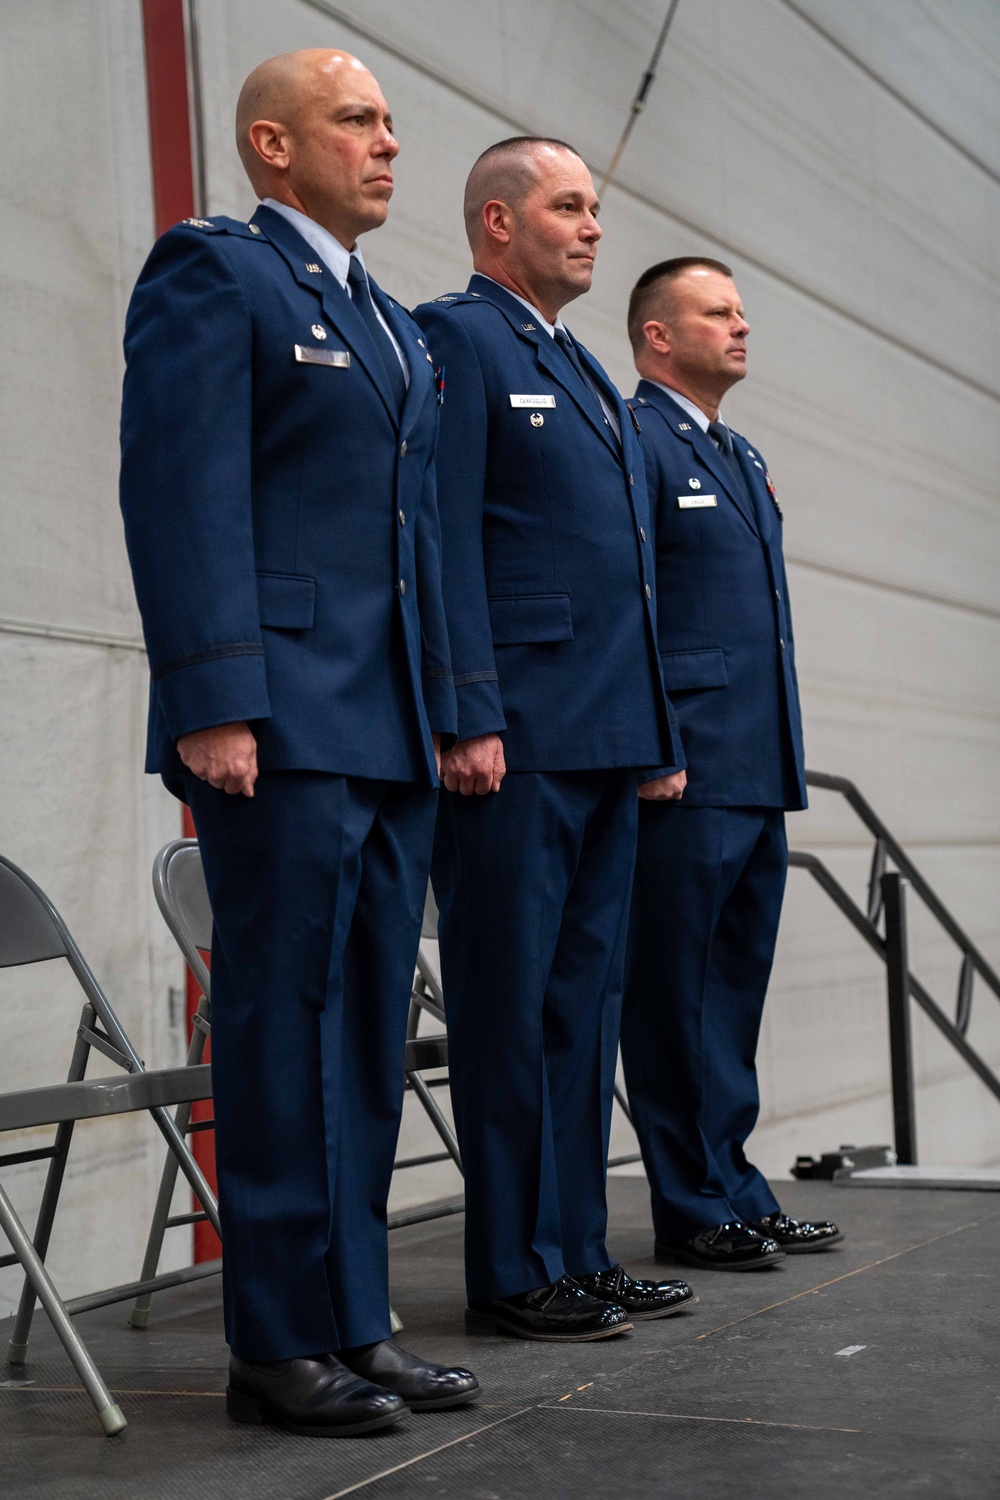 Lt. Col. Shaun Cruze promotes to colonel